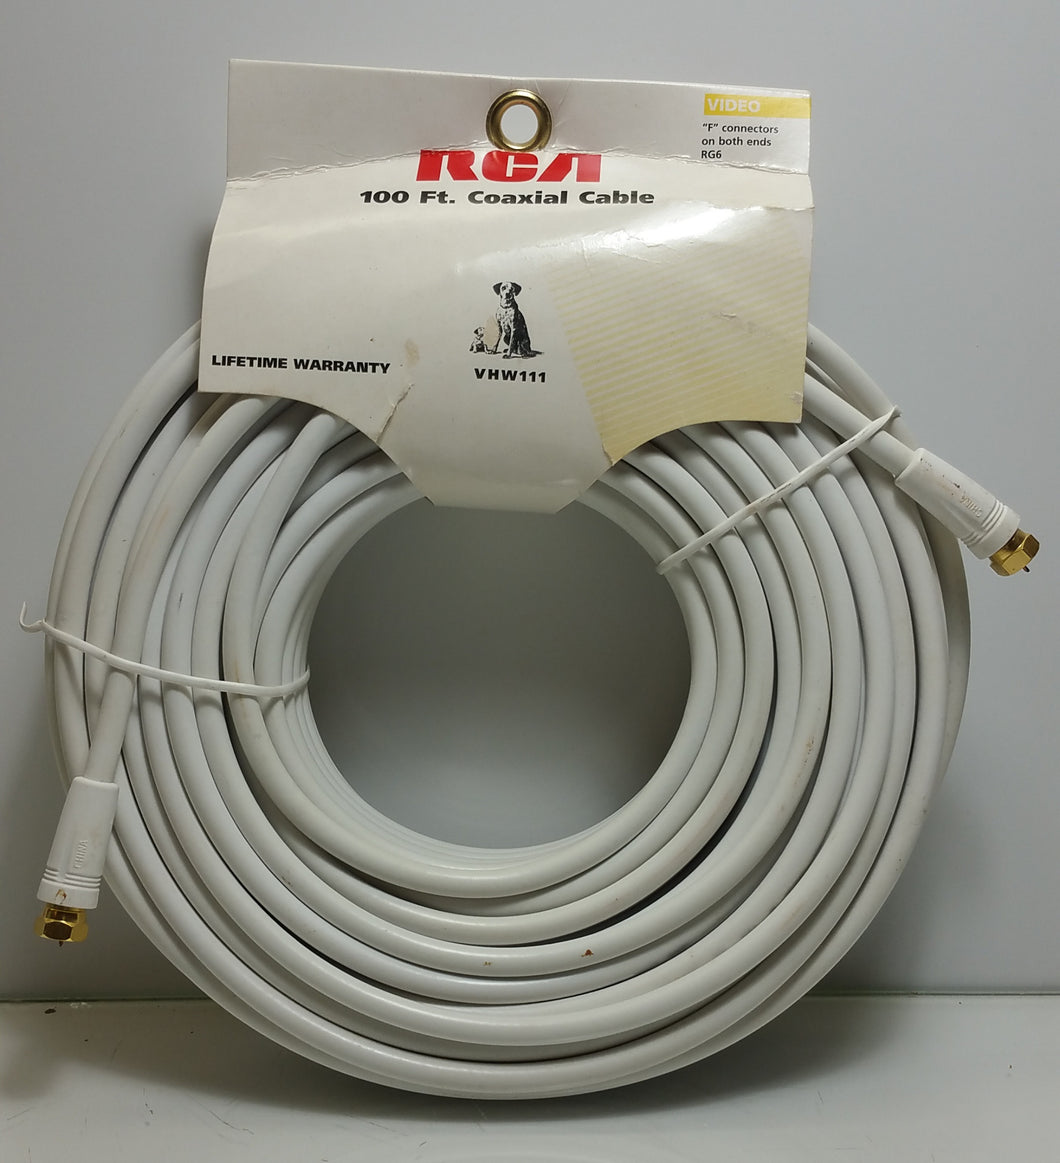 RCA VHW111NV White RG-6 Coaxial Cable With Ends (100 feet) - Masolut Superstore